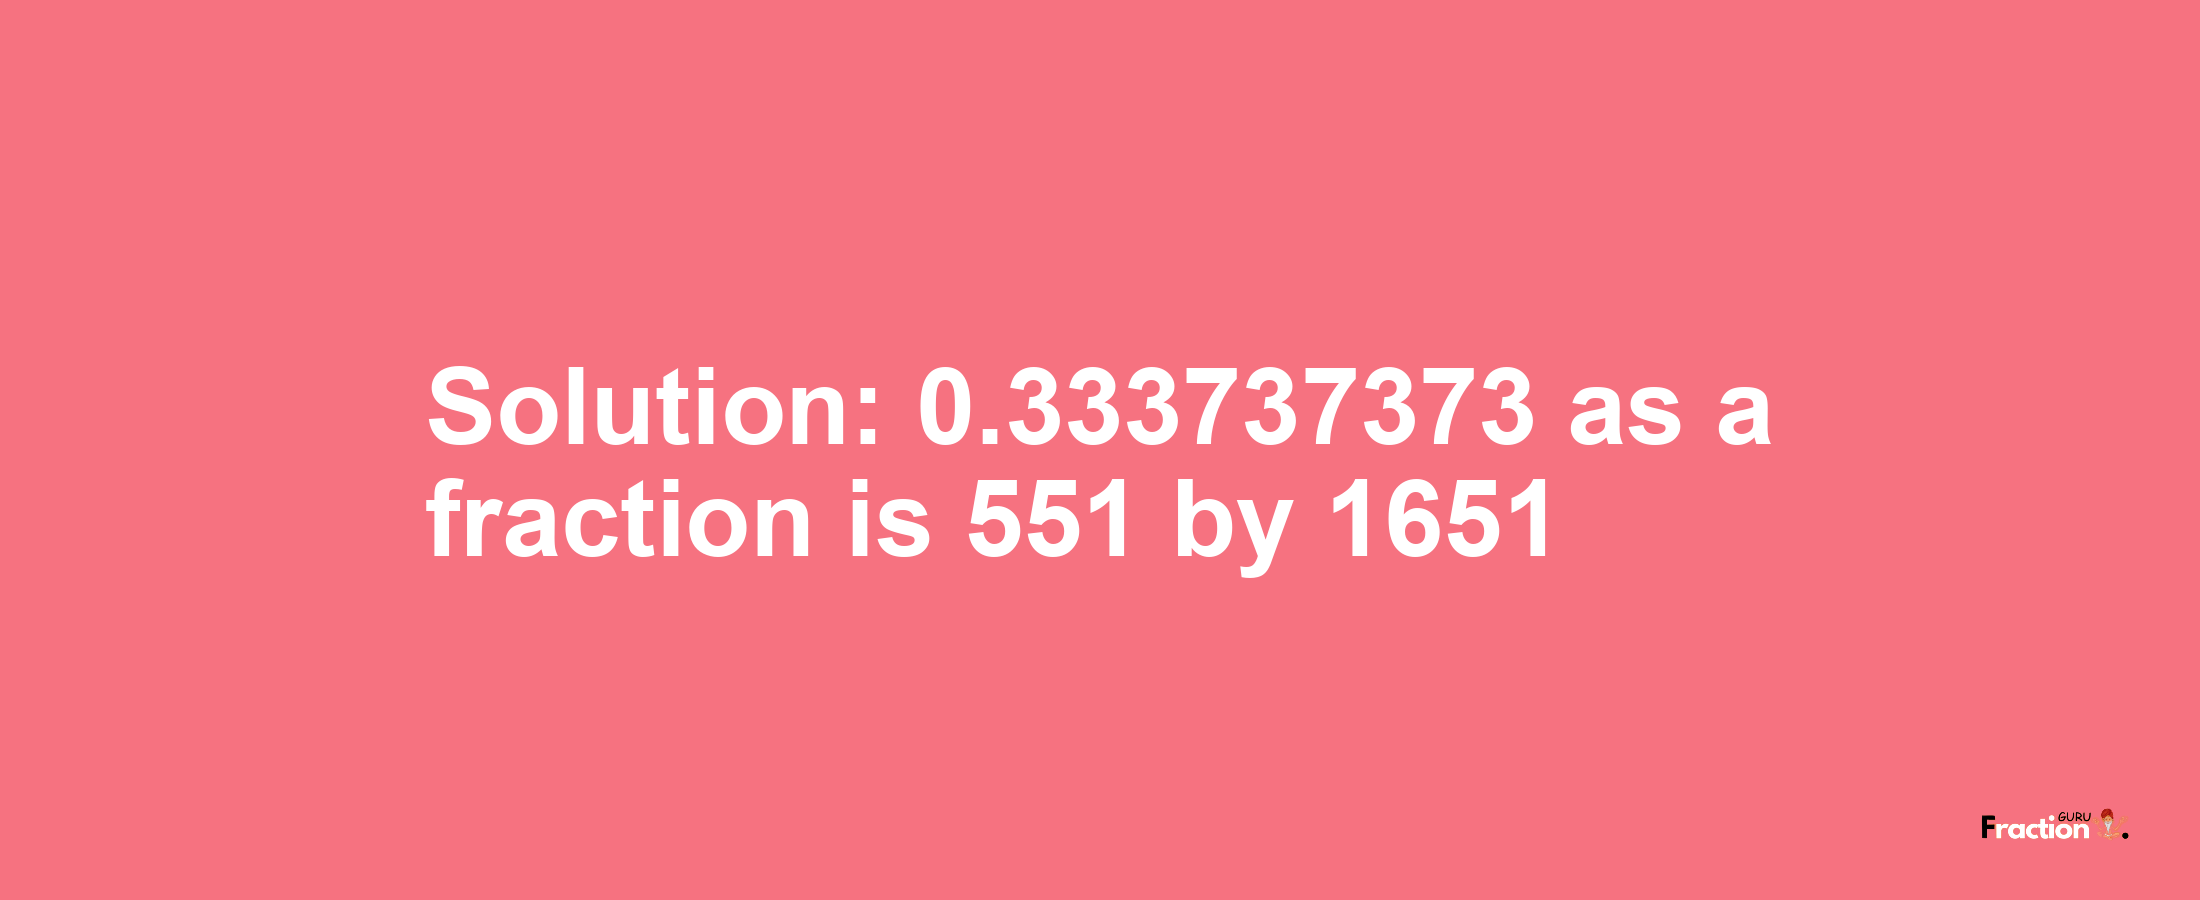 Solution:0.333737373 as a fraction is 551/1651